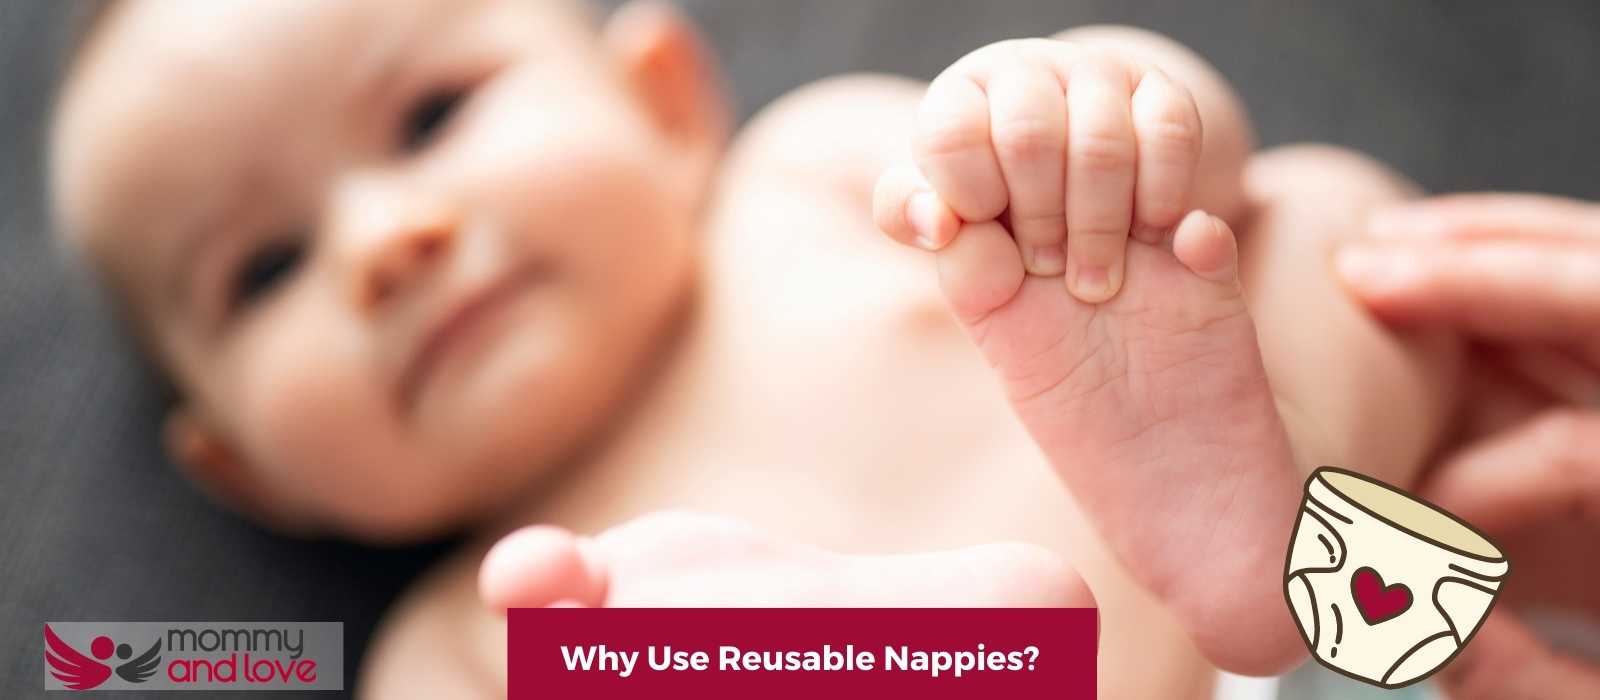 Why Use Reusable Nappies